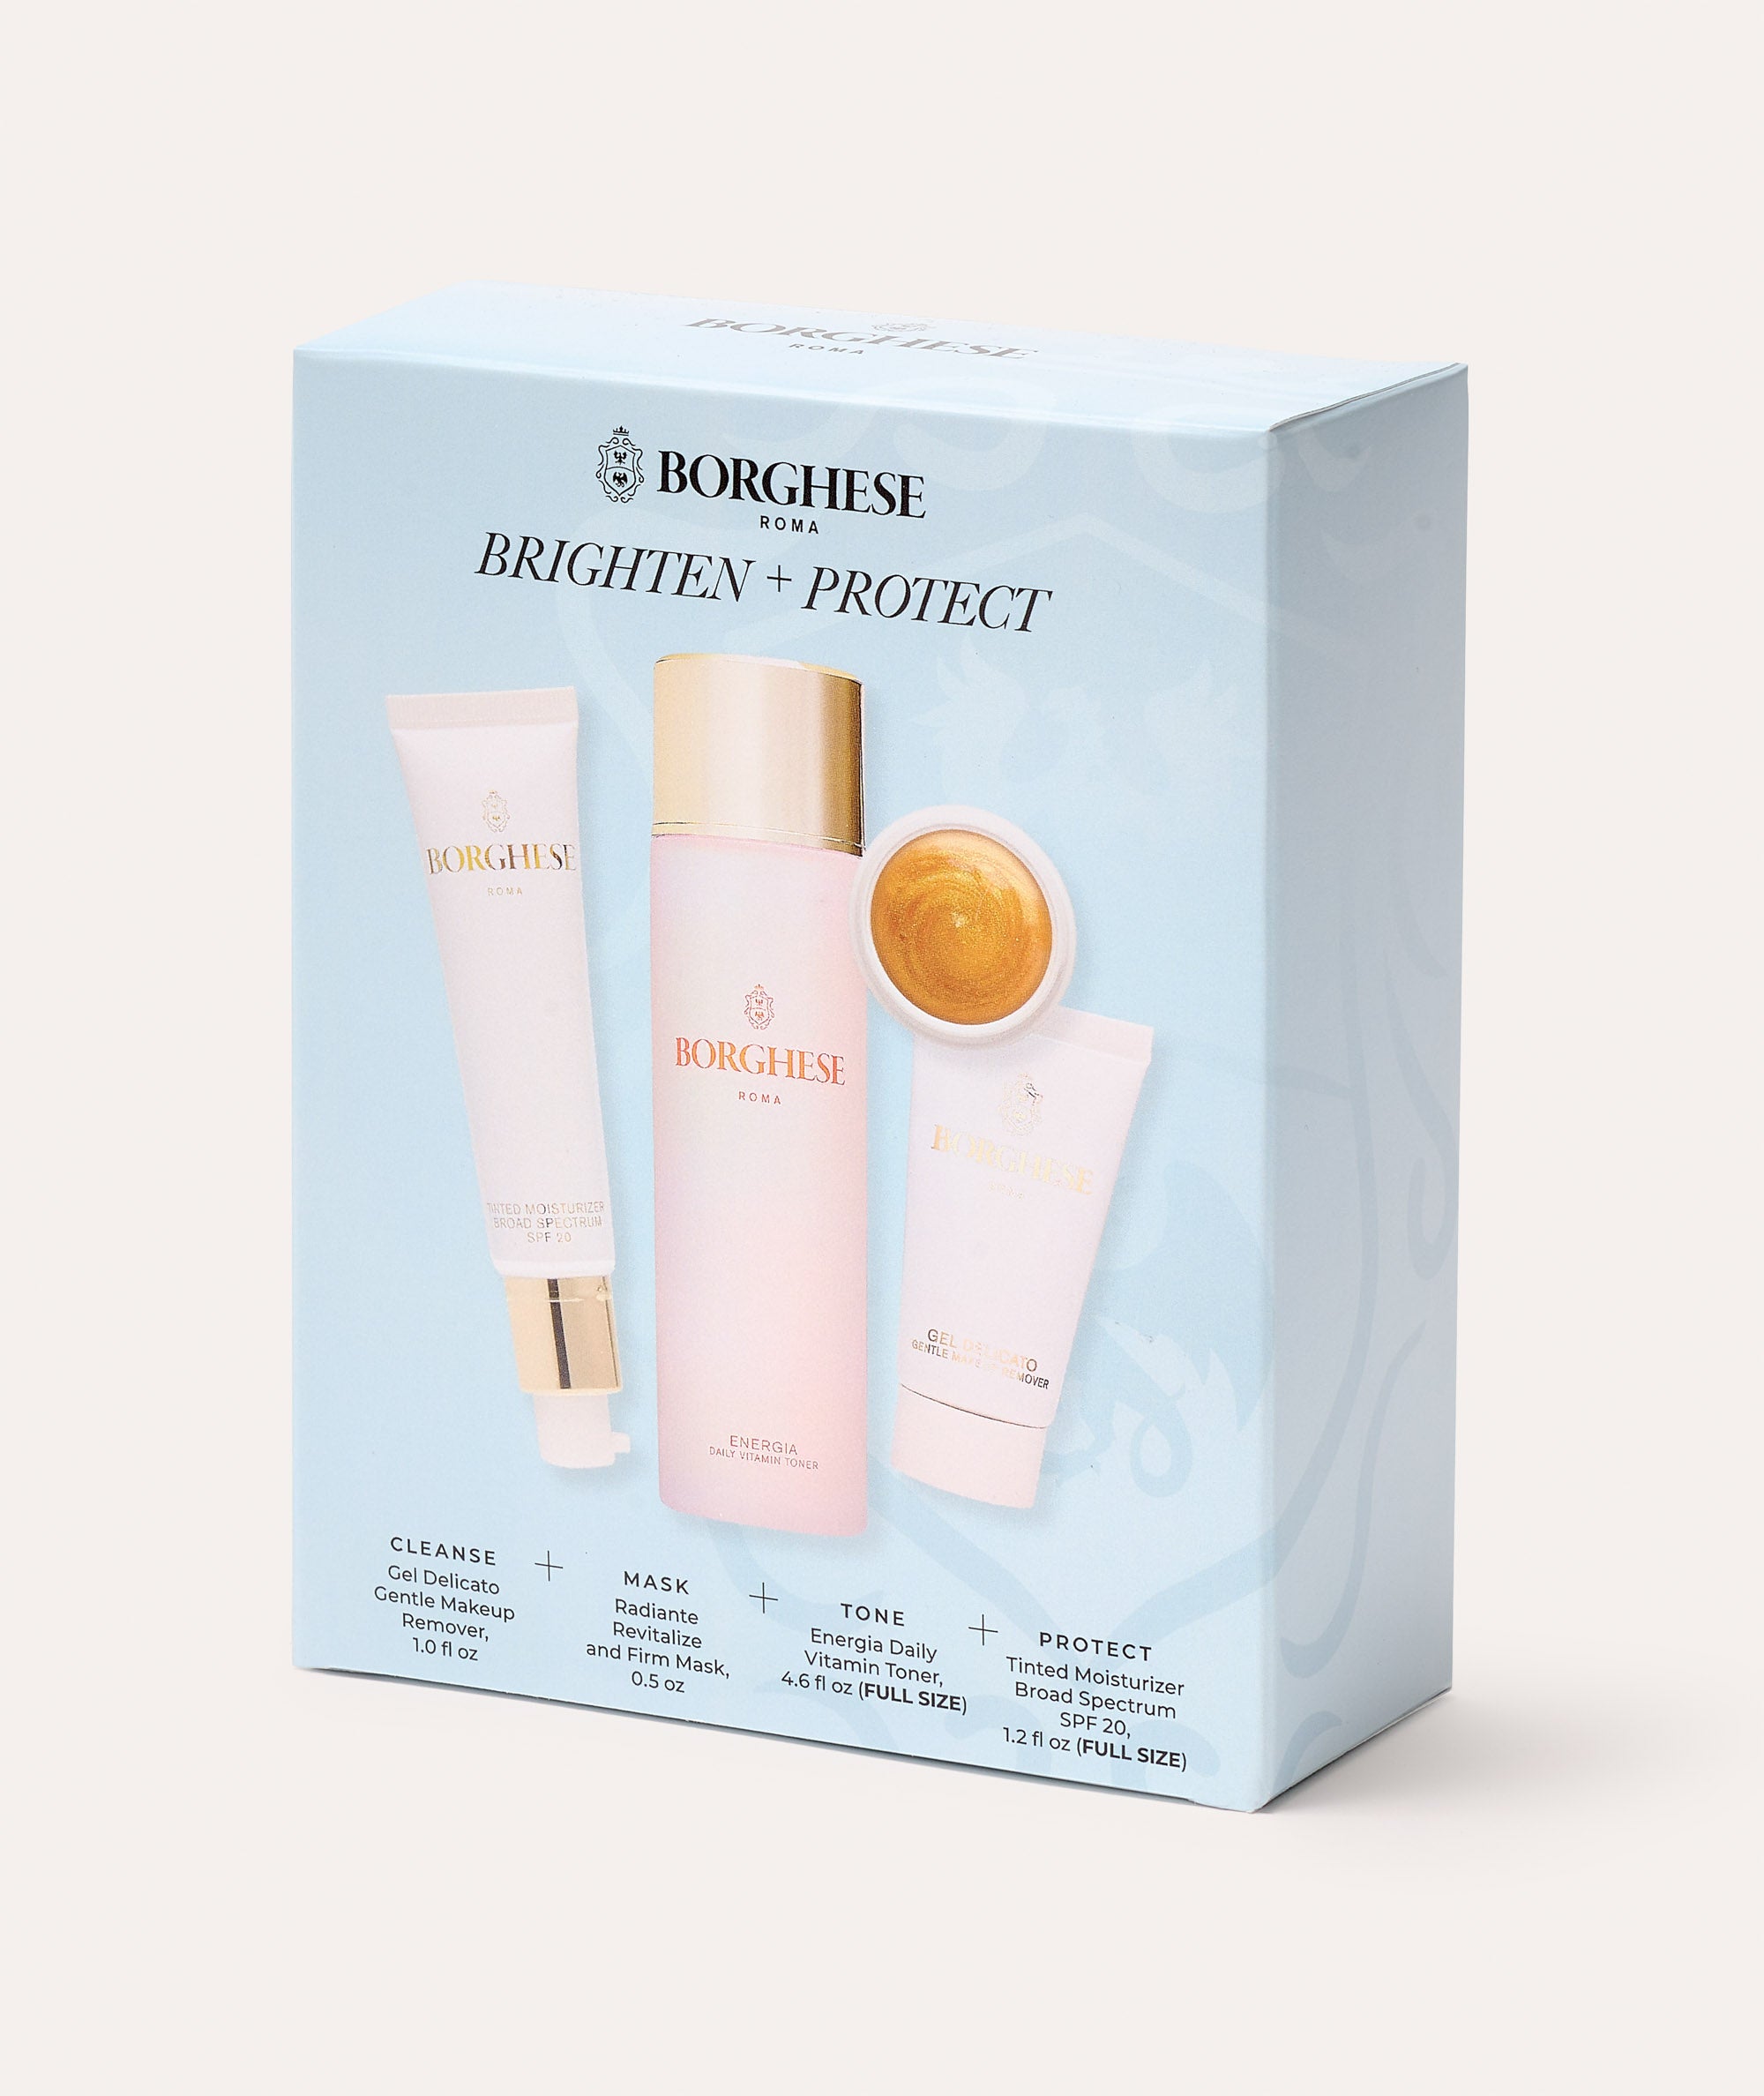 The Borghese 4-Piece Brighten & Protect Gift Set light blue gift box